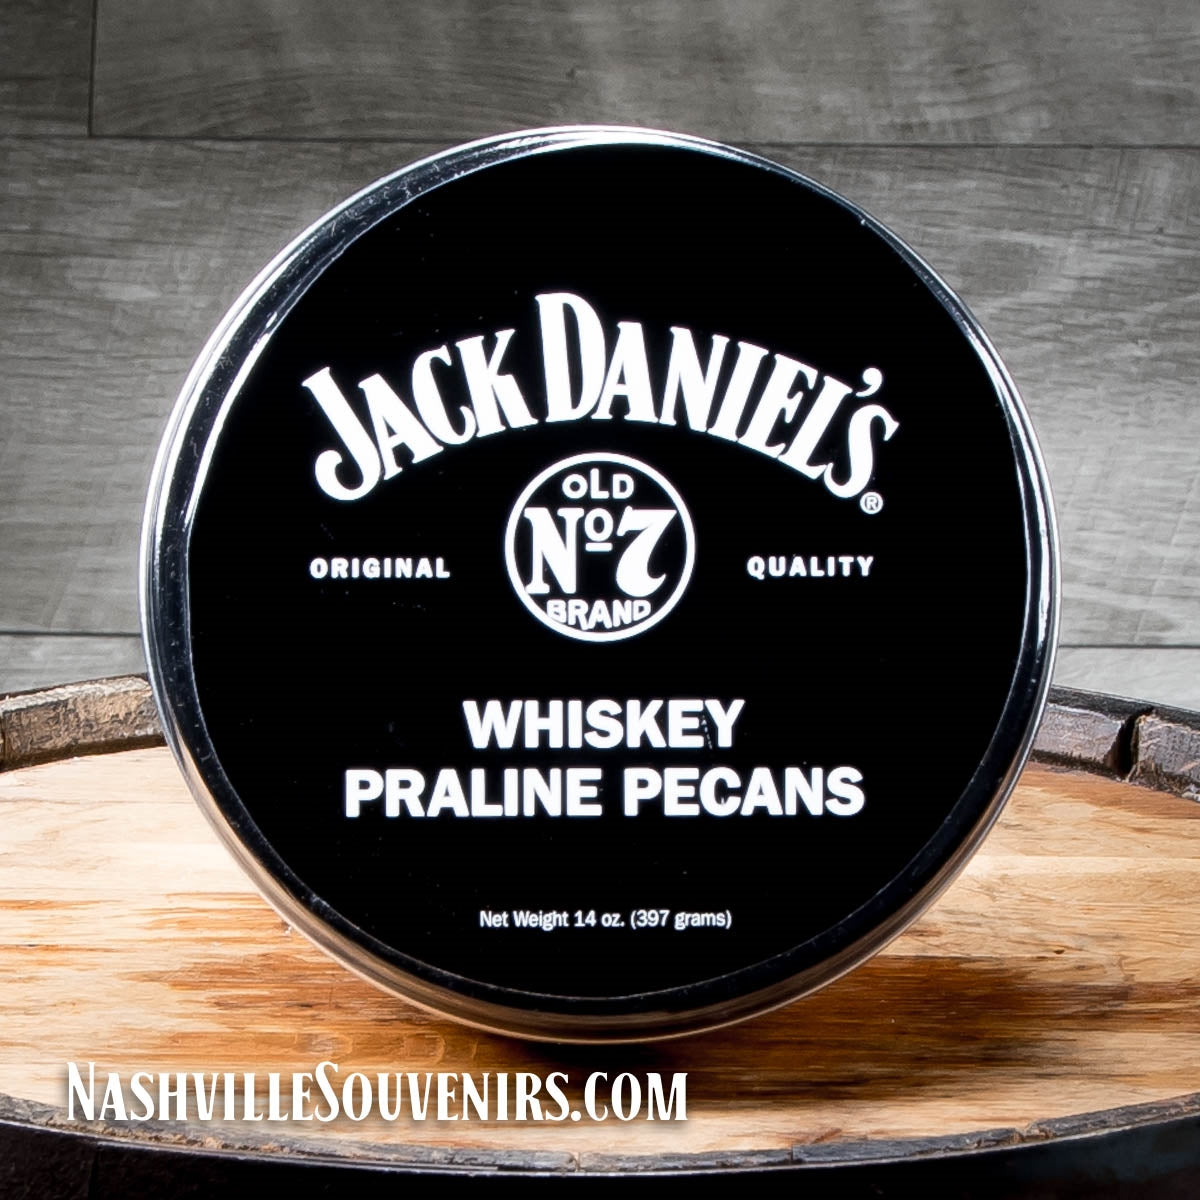 You'll go nuts when you taste these Jack Daniel's Whiskey Praline Pecans that come packaged in a nice collectible tin displaying the Jack Daniel's swing and bug logo.